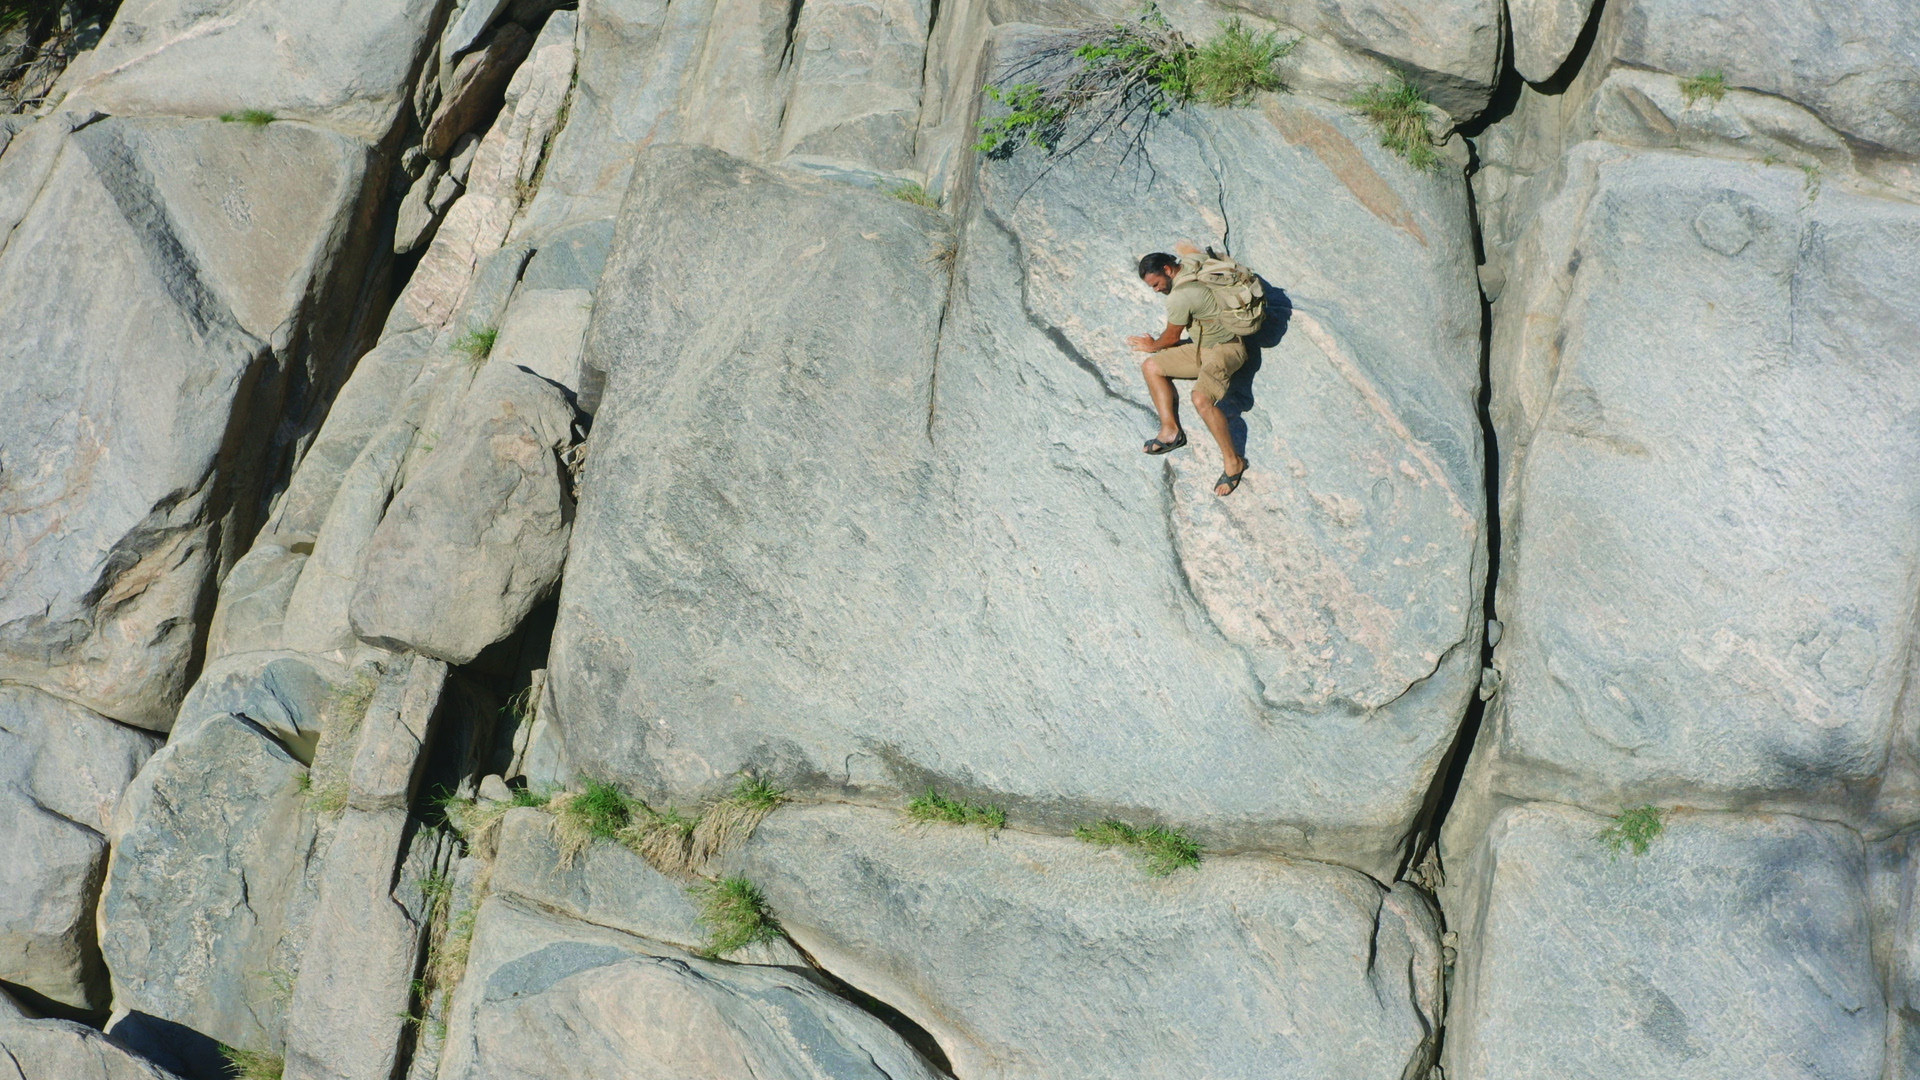 Hazen Audel scaling down a rock face. This is from Primal Survivor: Extreme African Safari. [Photo of the day - May 2023]